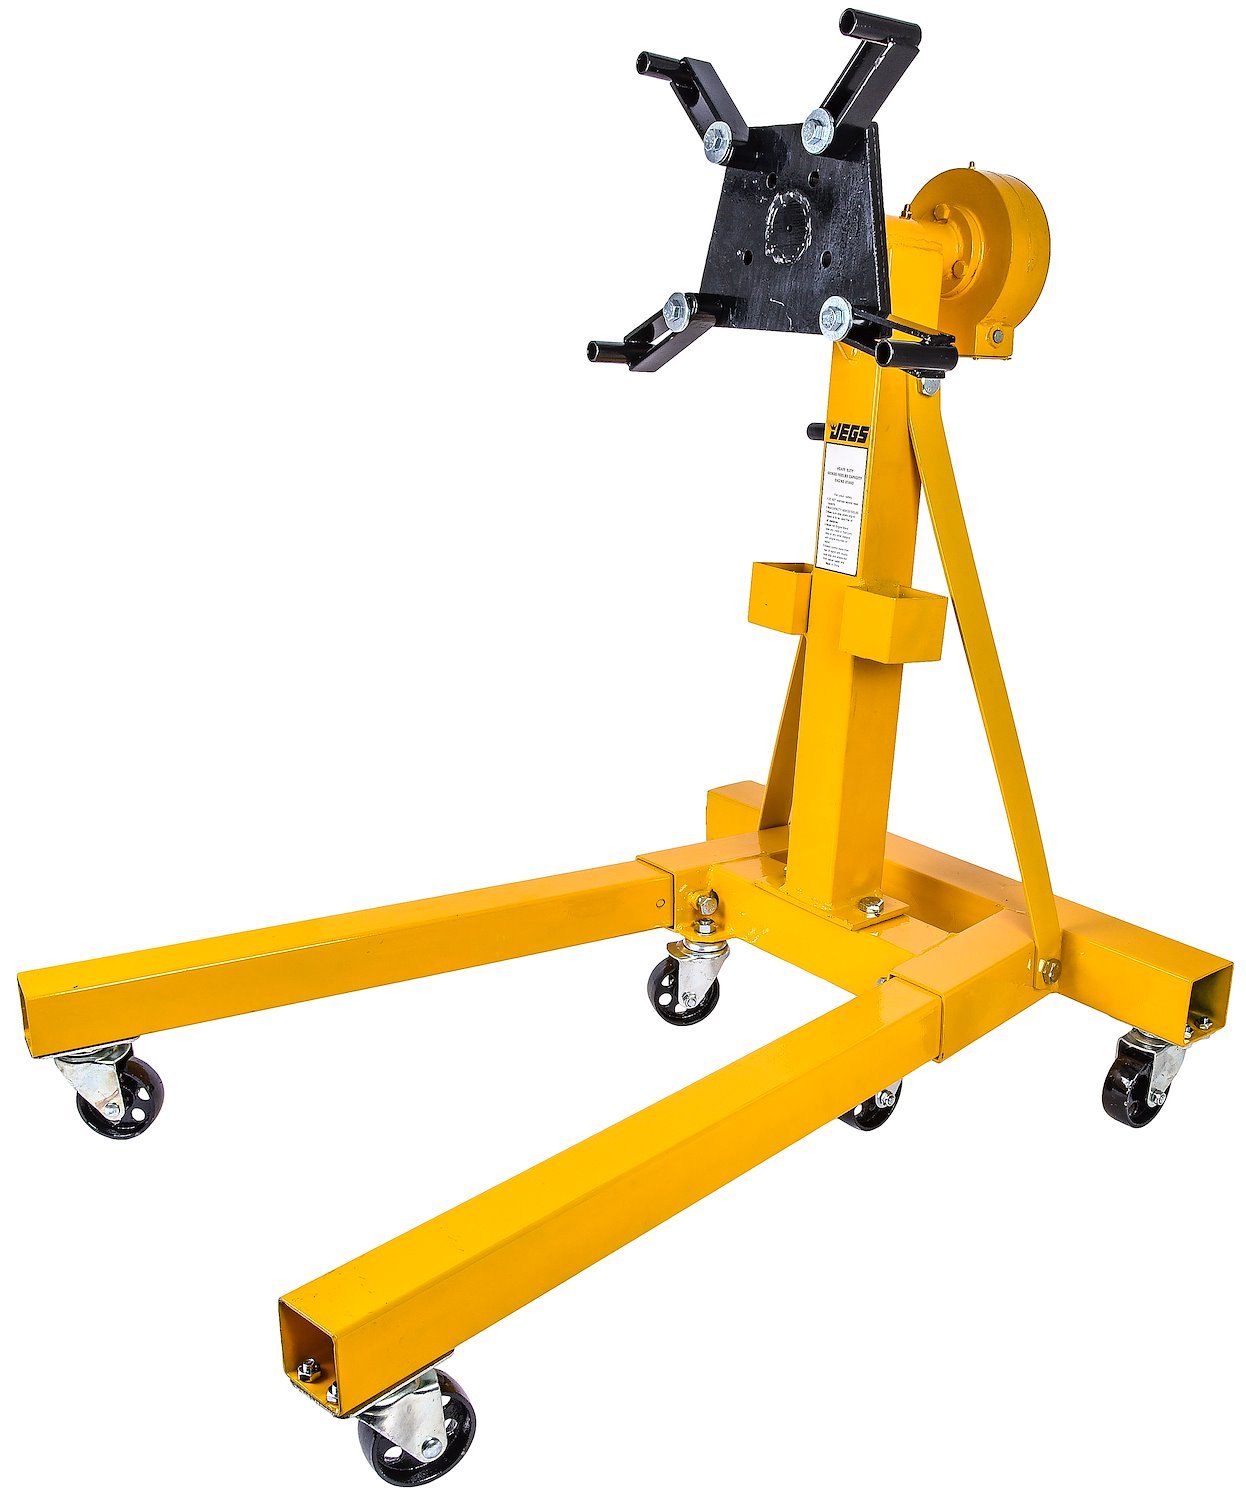 Geared Rotating Engine Stand [1500 lb. Capacity]